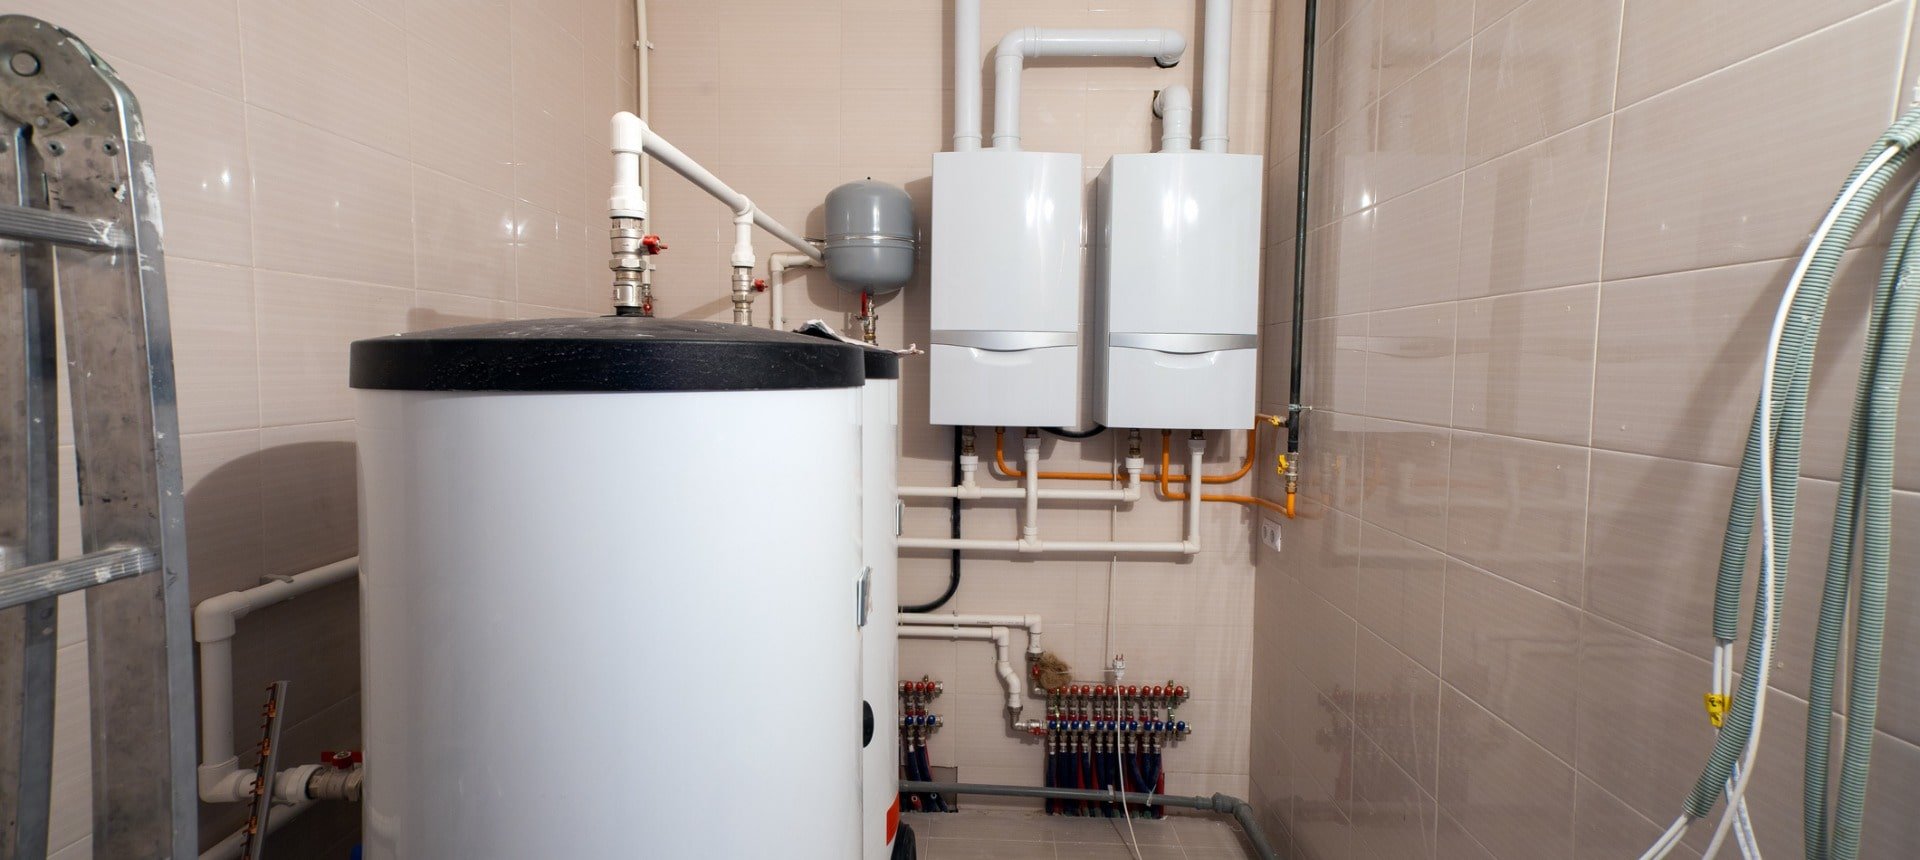 Common Issues of Tankless Water Heaters